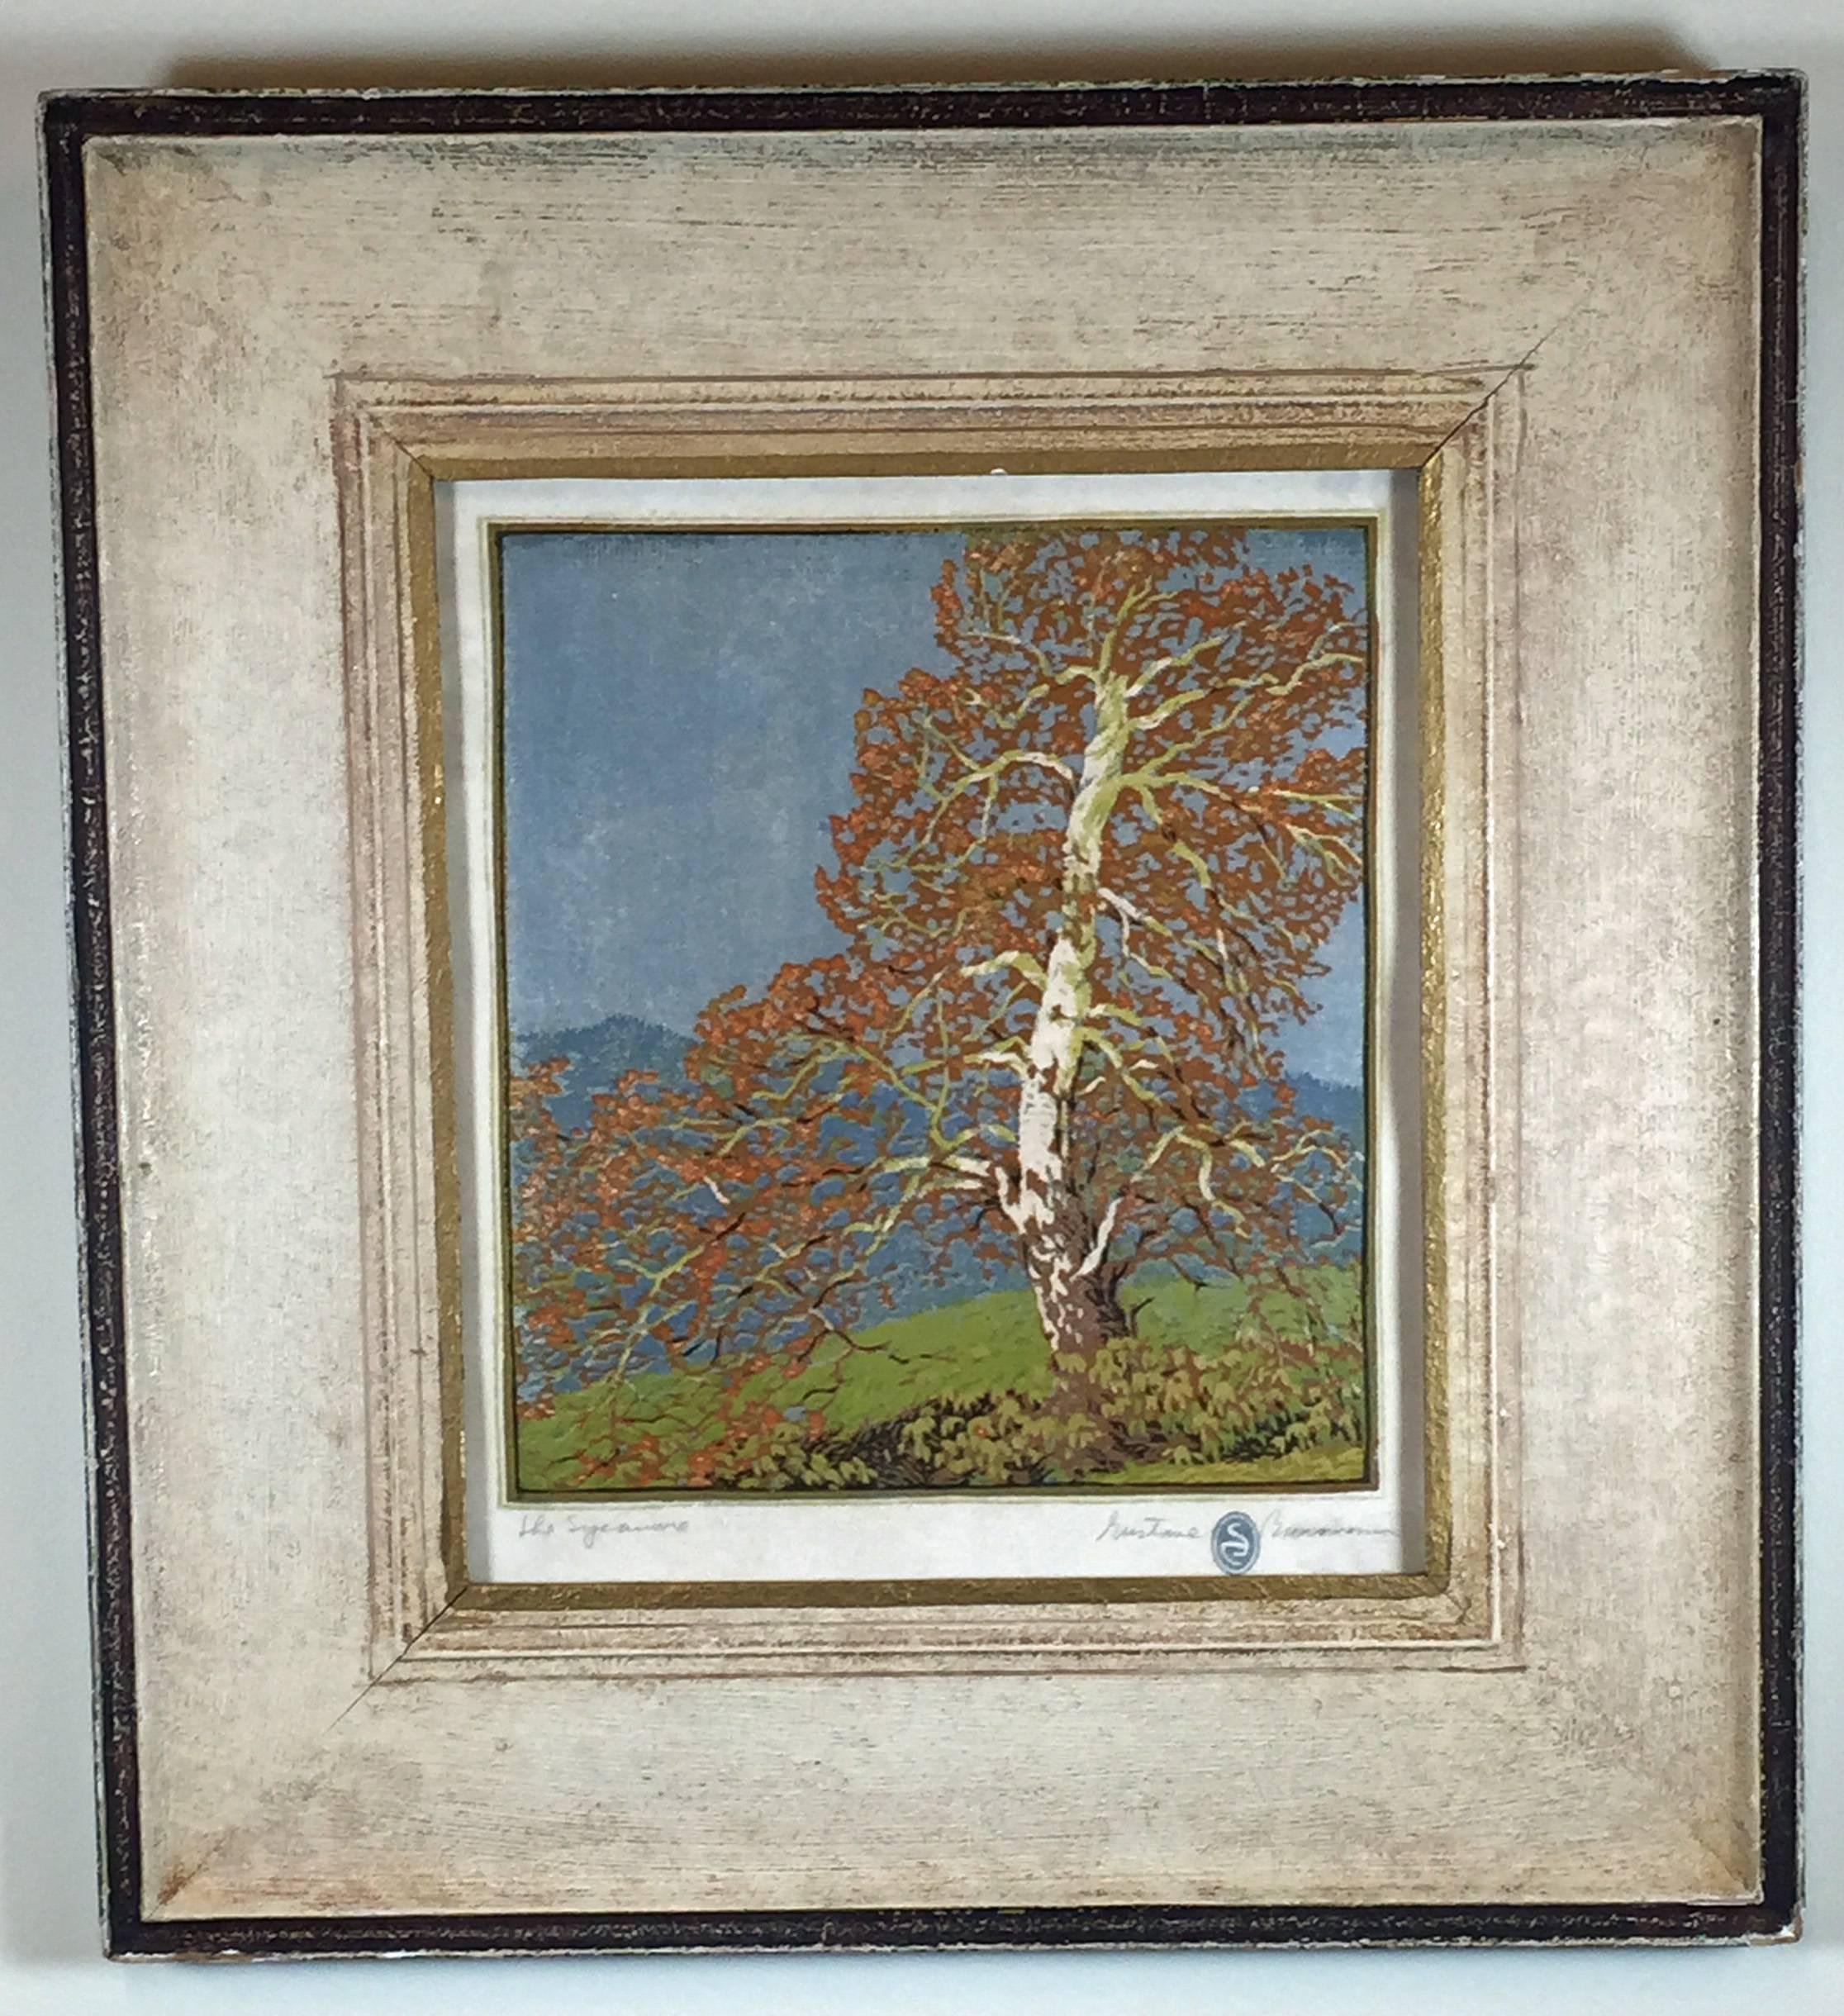 THE SYCAMORE - Print by Gustave Baumann